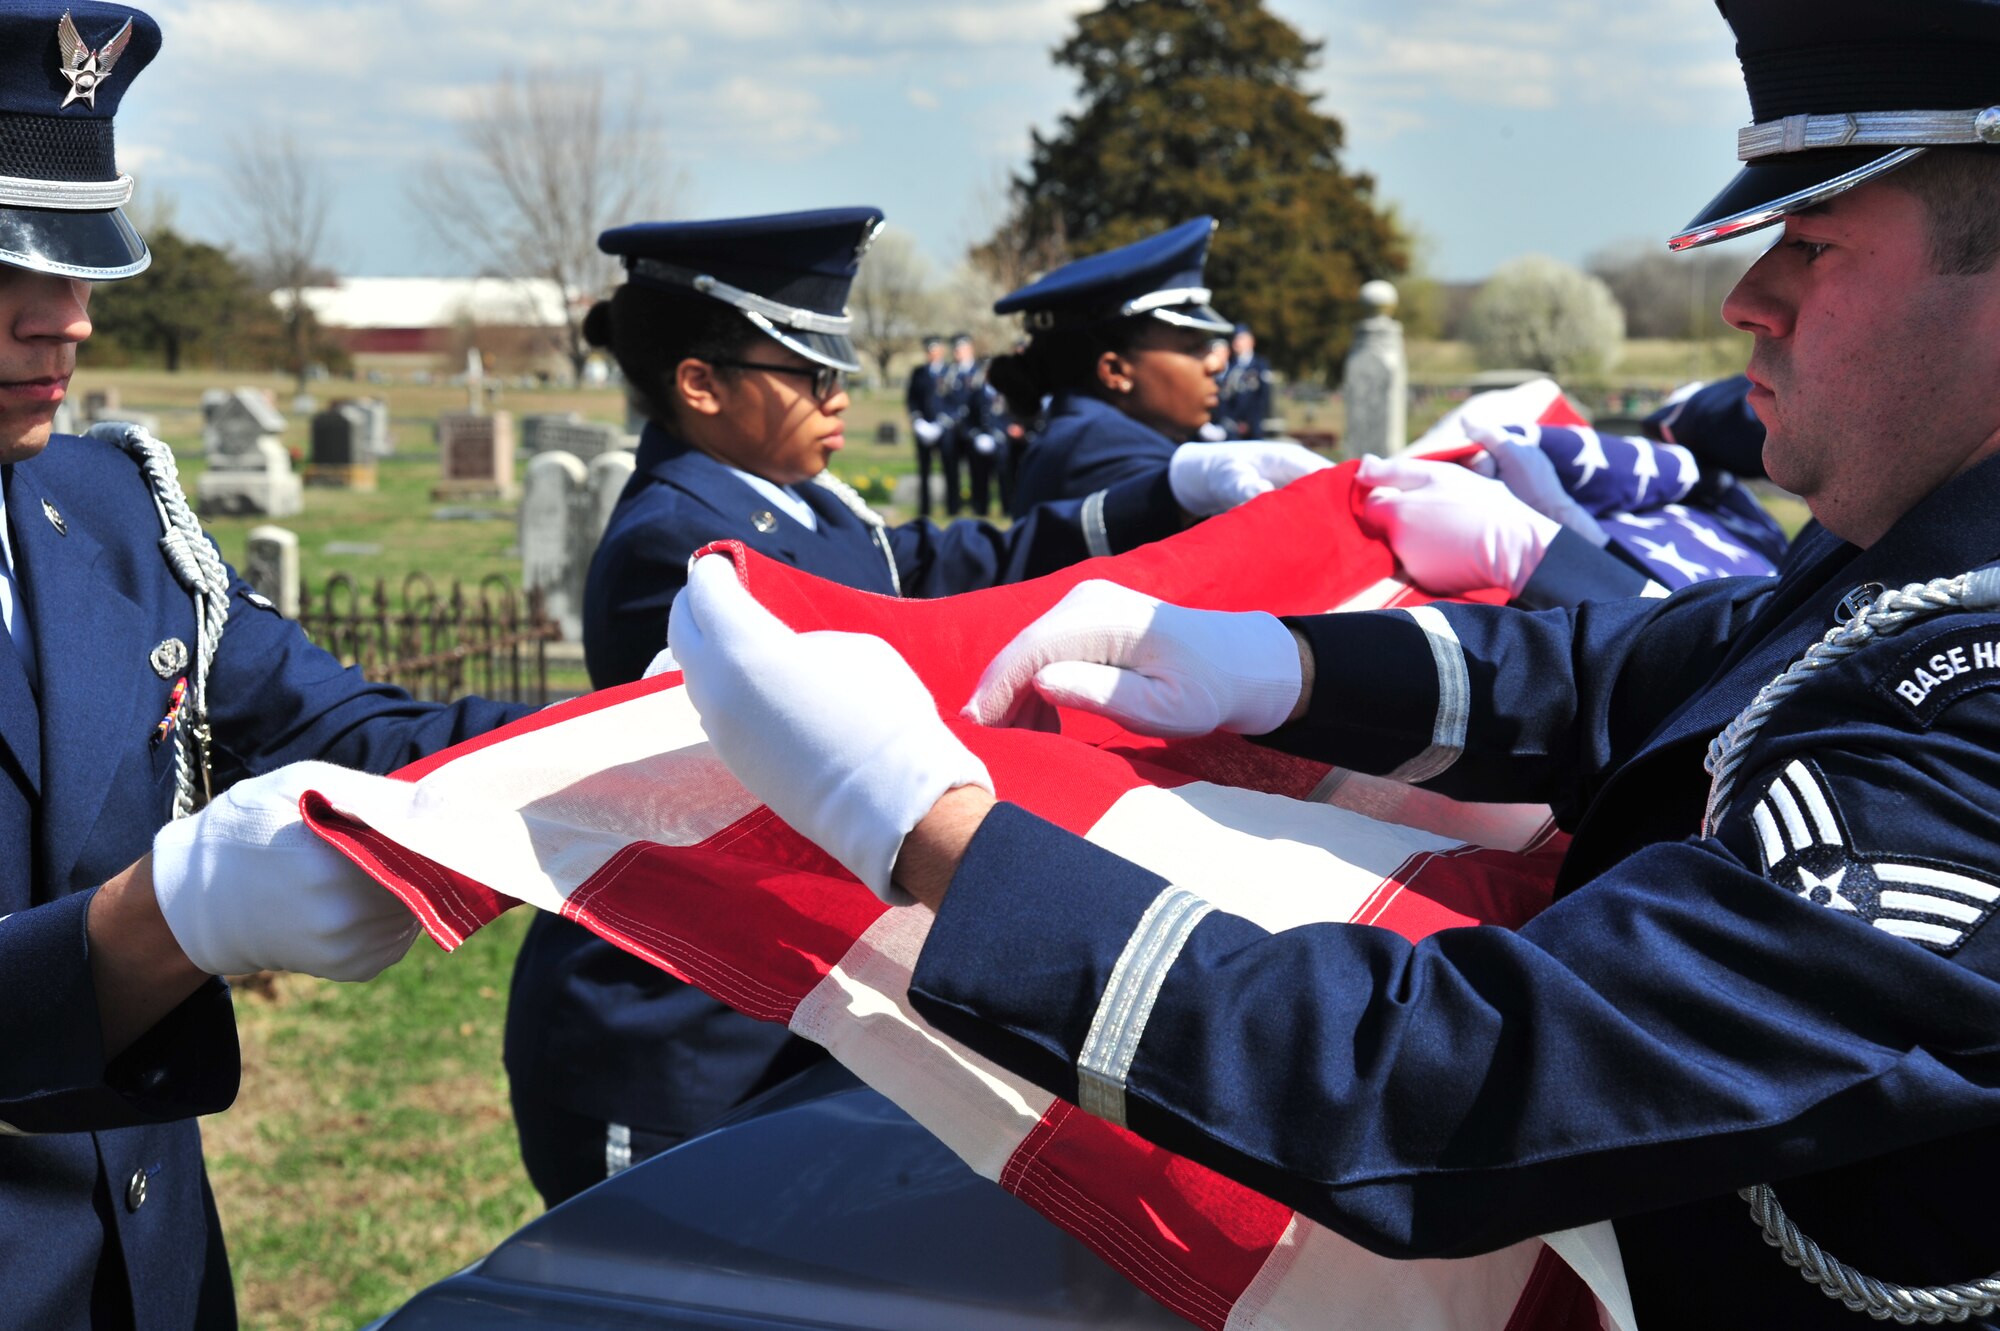 Members of Whiteman Honor Guard practice the procedures of a military funeral at Knob Noster cemetery in Knob Noster, Mo., March 15, 2016. Whiteman Honor Guard serves more than 100 counties spanning Missouri to Kansas covering more than 70,000 square miles across both states. Whiteman Honor Guard represents the respect each fallen service member deserves, and upholds traditions held dear to the armed forces. (U.S. Air Force photos by Airman 1st Class Jovan Banks)